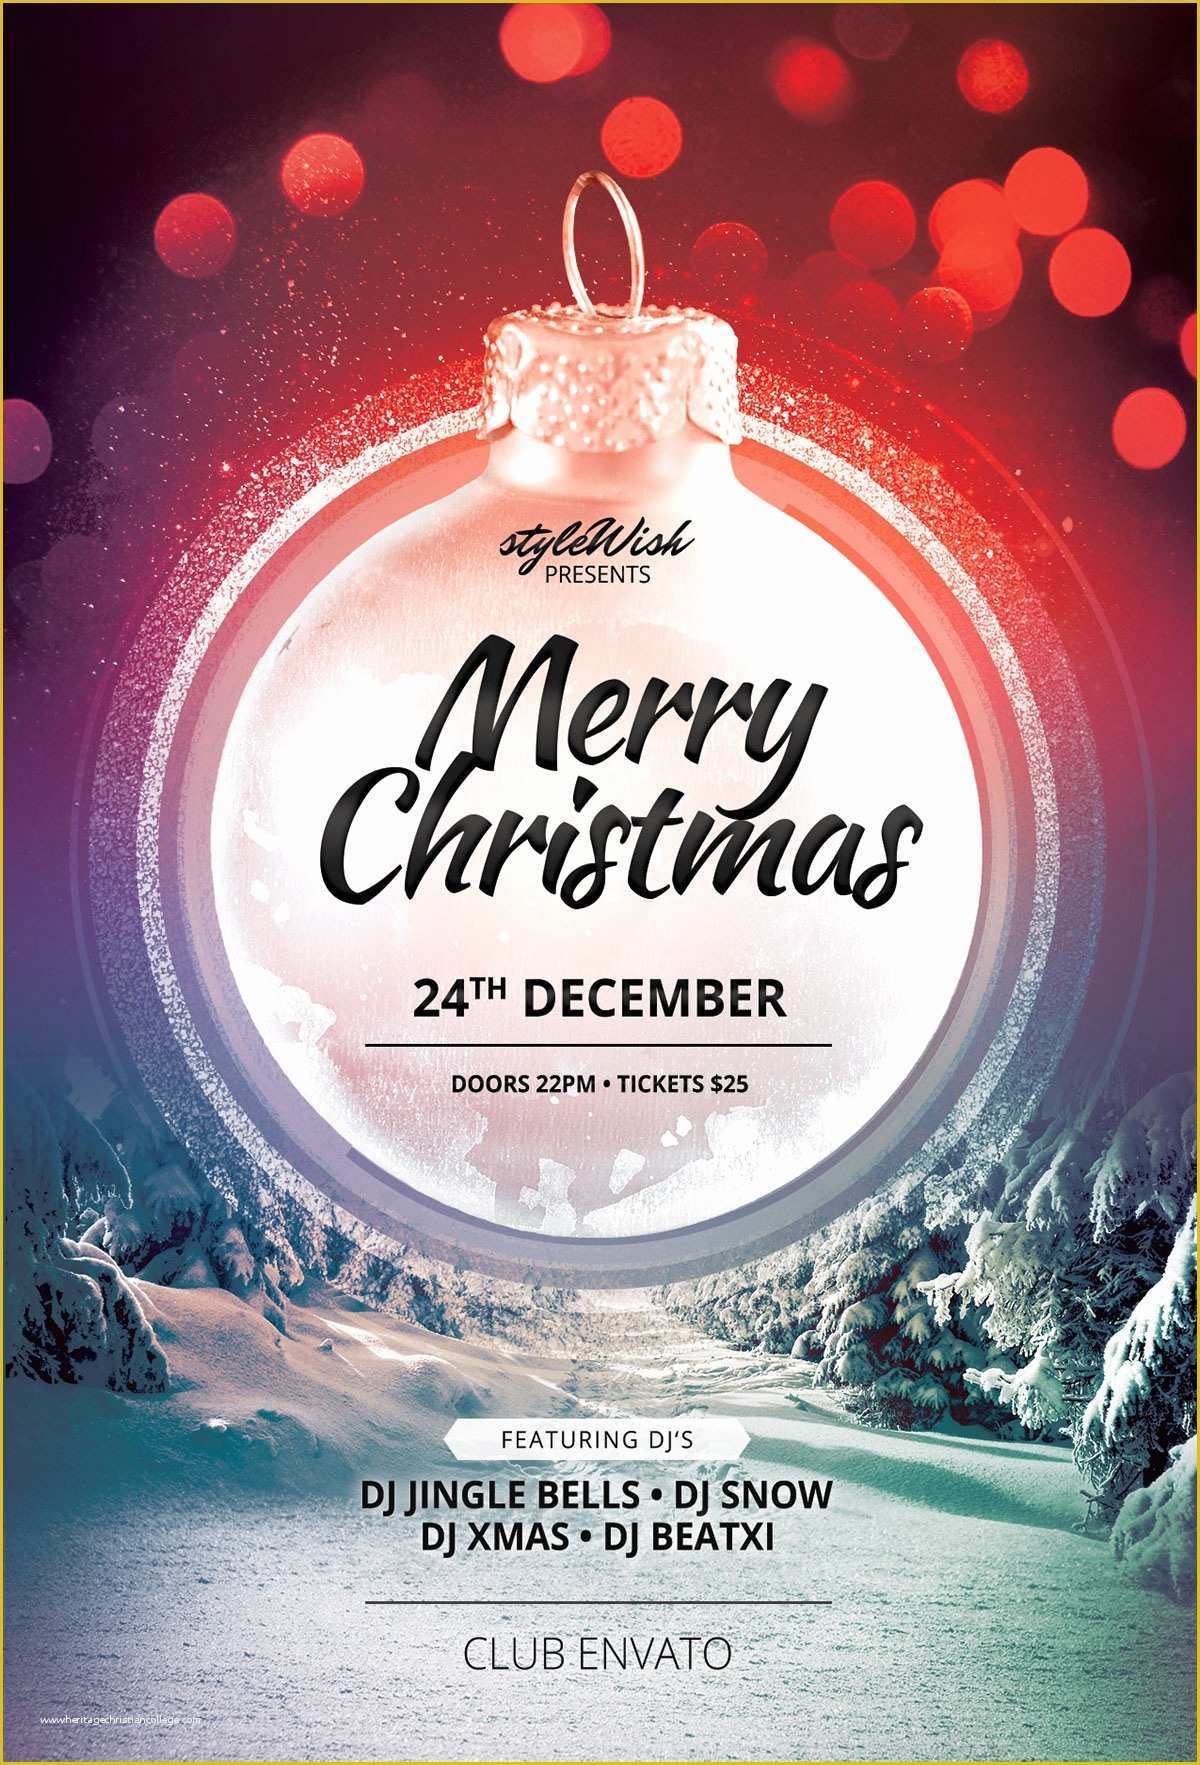 Christmas Flyers Templates Free Psd Of Merry Christmas Flyer Template On Behance